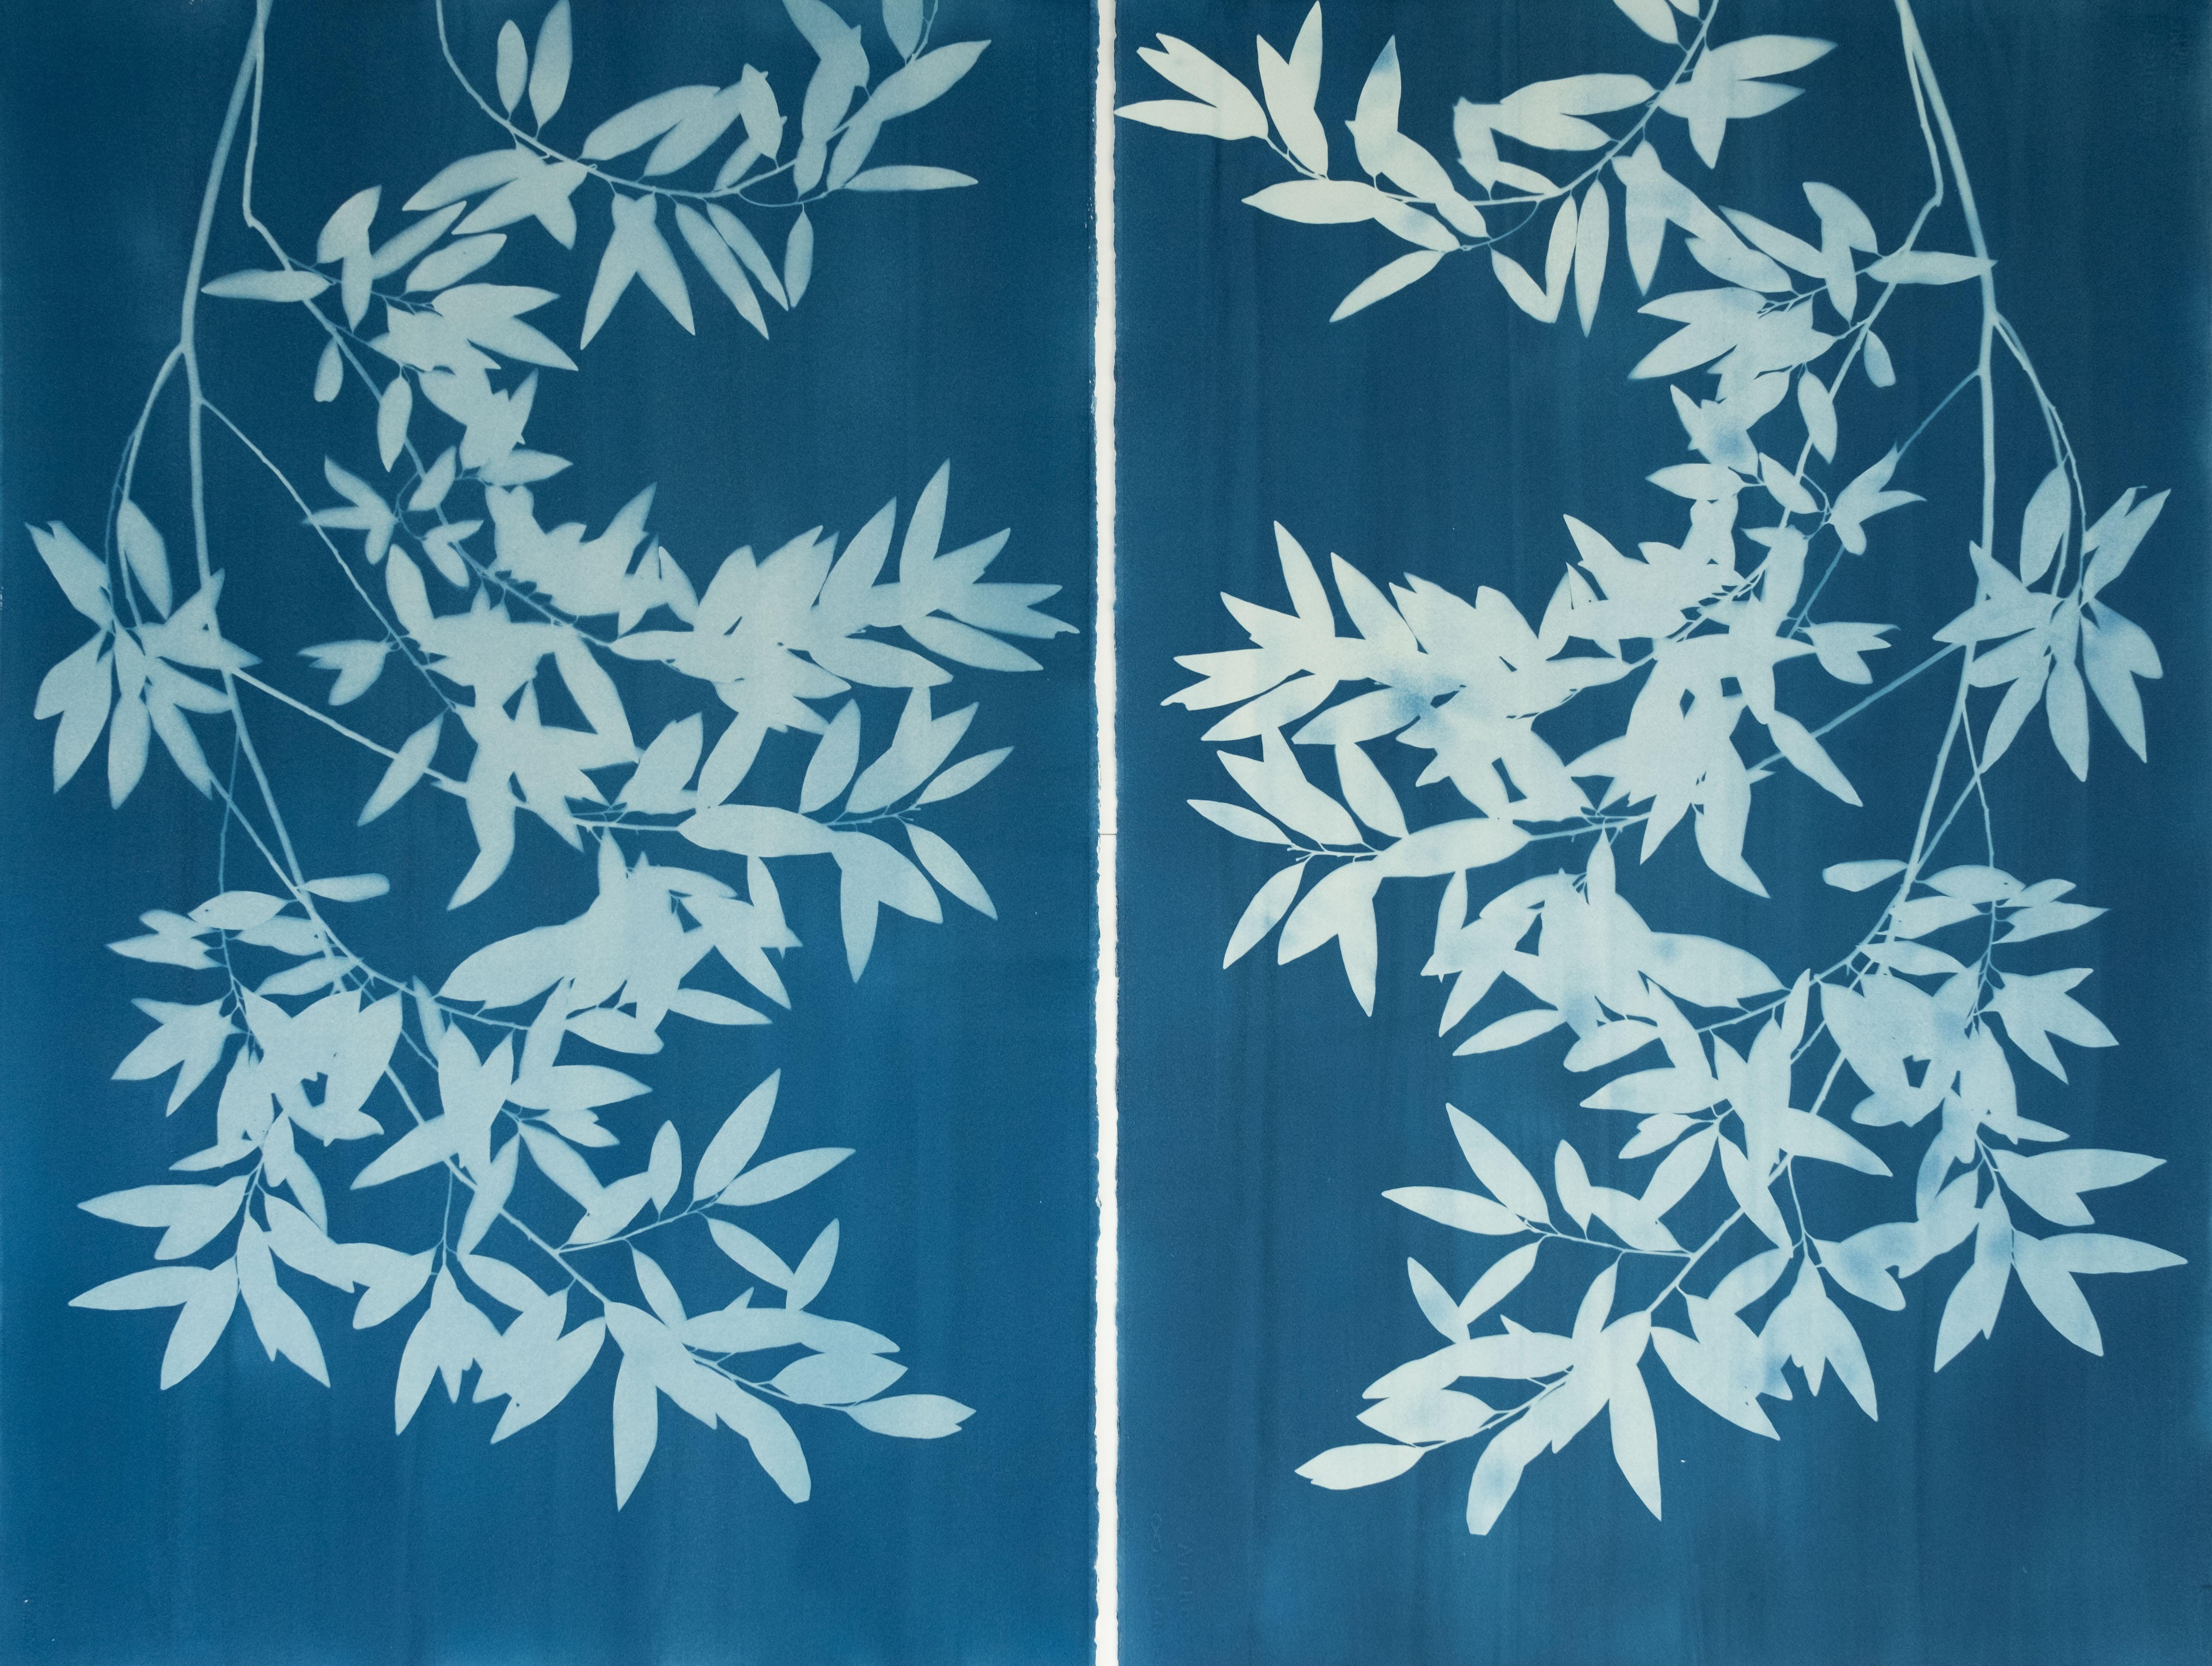 Christine So Still-Life Print - Bay Laurel Diptych (Hand-printed cyanotype, 40 x 52 inches combined)